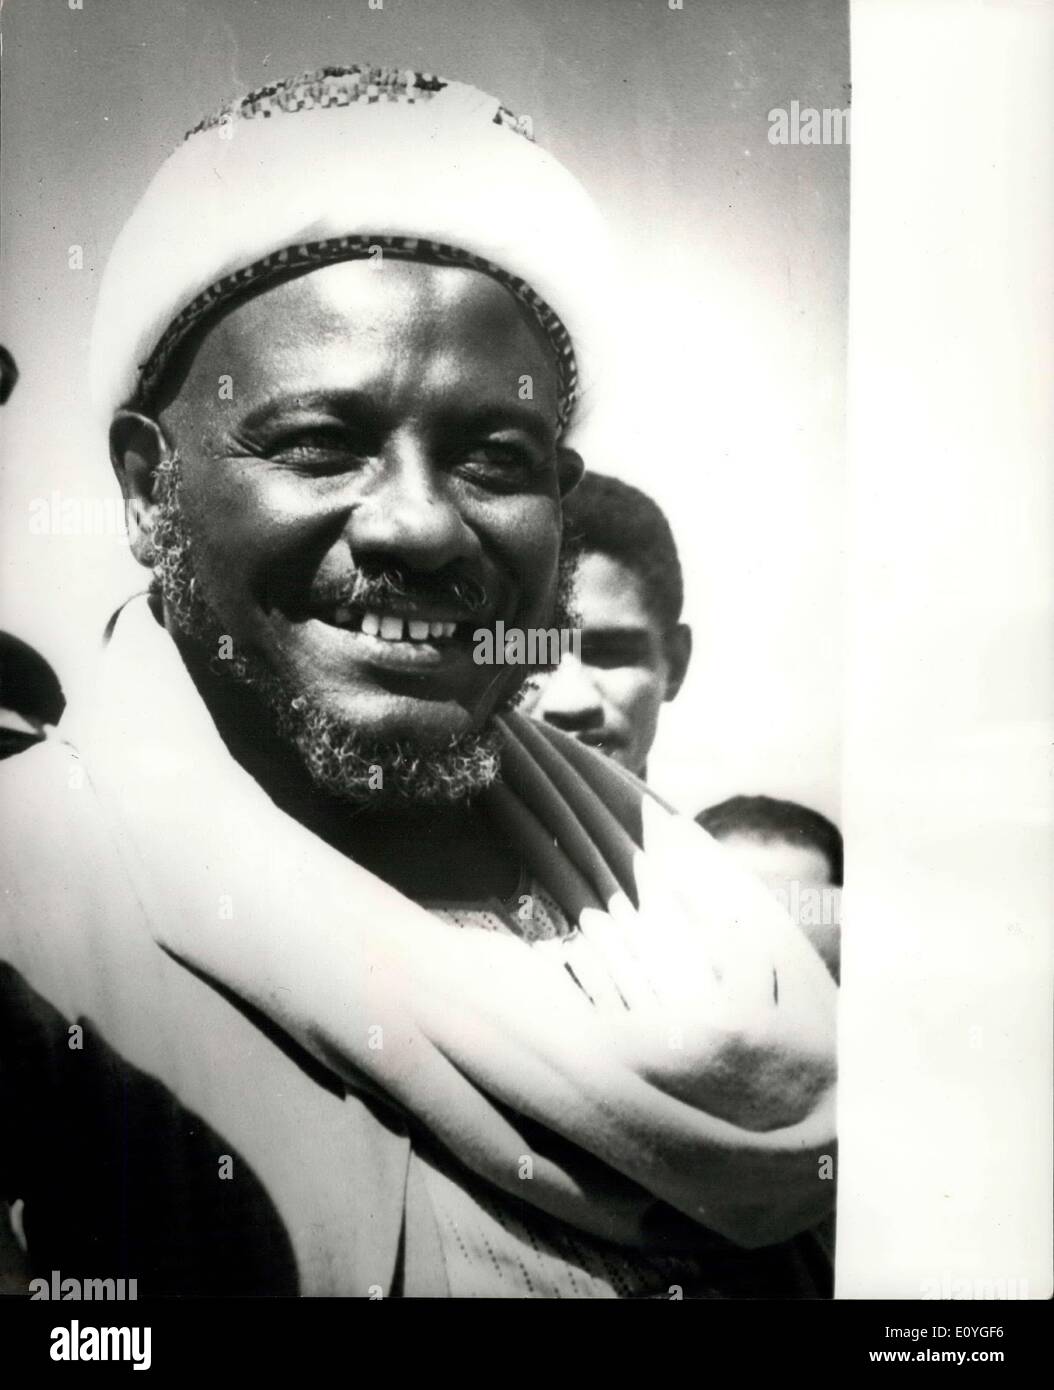 Apr. 10, 1970 - Imam Killed In Attempt To Escape: Imam Al Hadi Al Mahdi was killed on (March 31) when trying to escape to Ethiopia after ab attempted revolt against their gime of Major-Generl Numeiry, Prime Minister and leader of the Revolutionary Council of the Sudan. General Numeiry said that after the Army had liquidated pockets of resistance on Aba Island, the White Nile stronghold of the Iman and his followers, the Imam asked for time to surrender himself, but instead tried to cross the border into Ethiopia Stock Photo